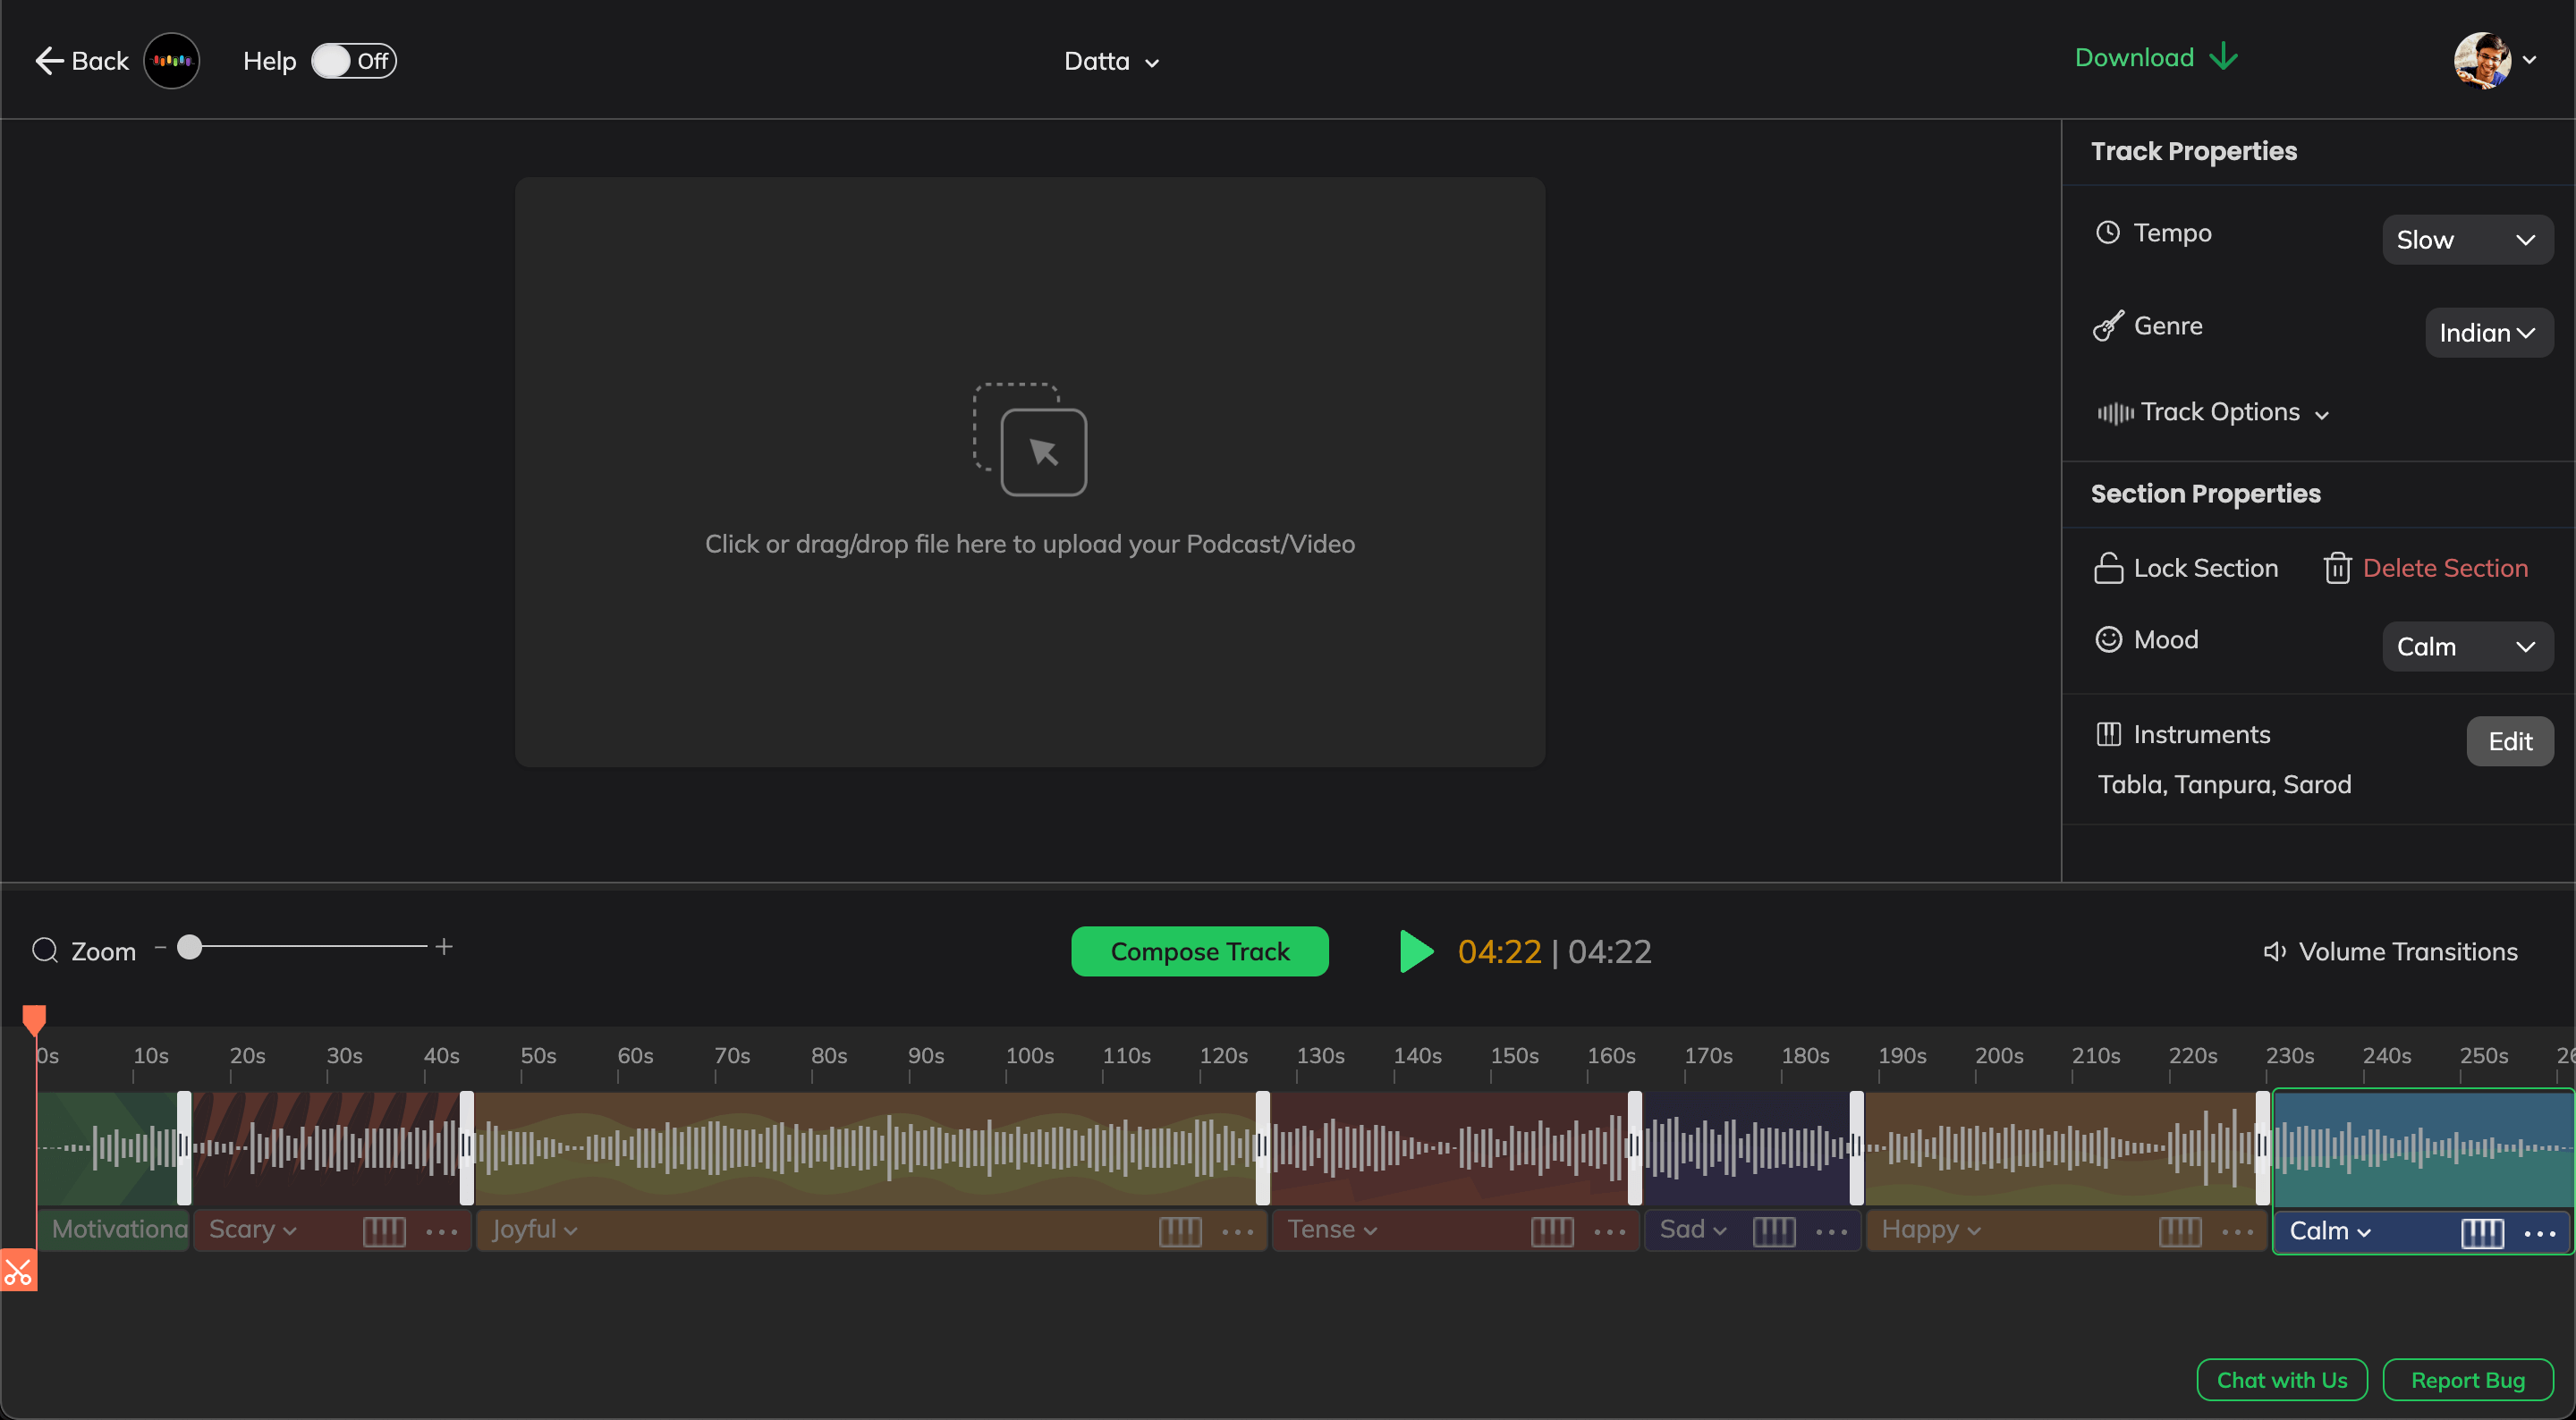 Using BeatovenAI to generate an Indian Classical music track with moods according to the story